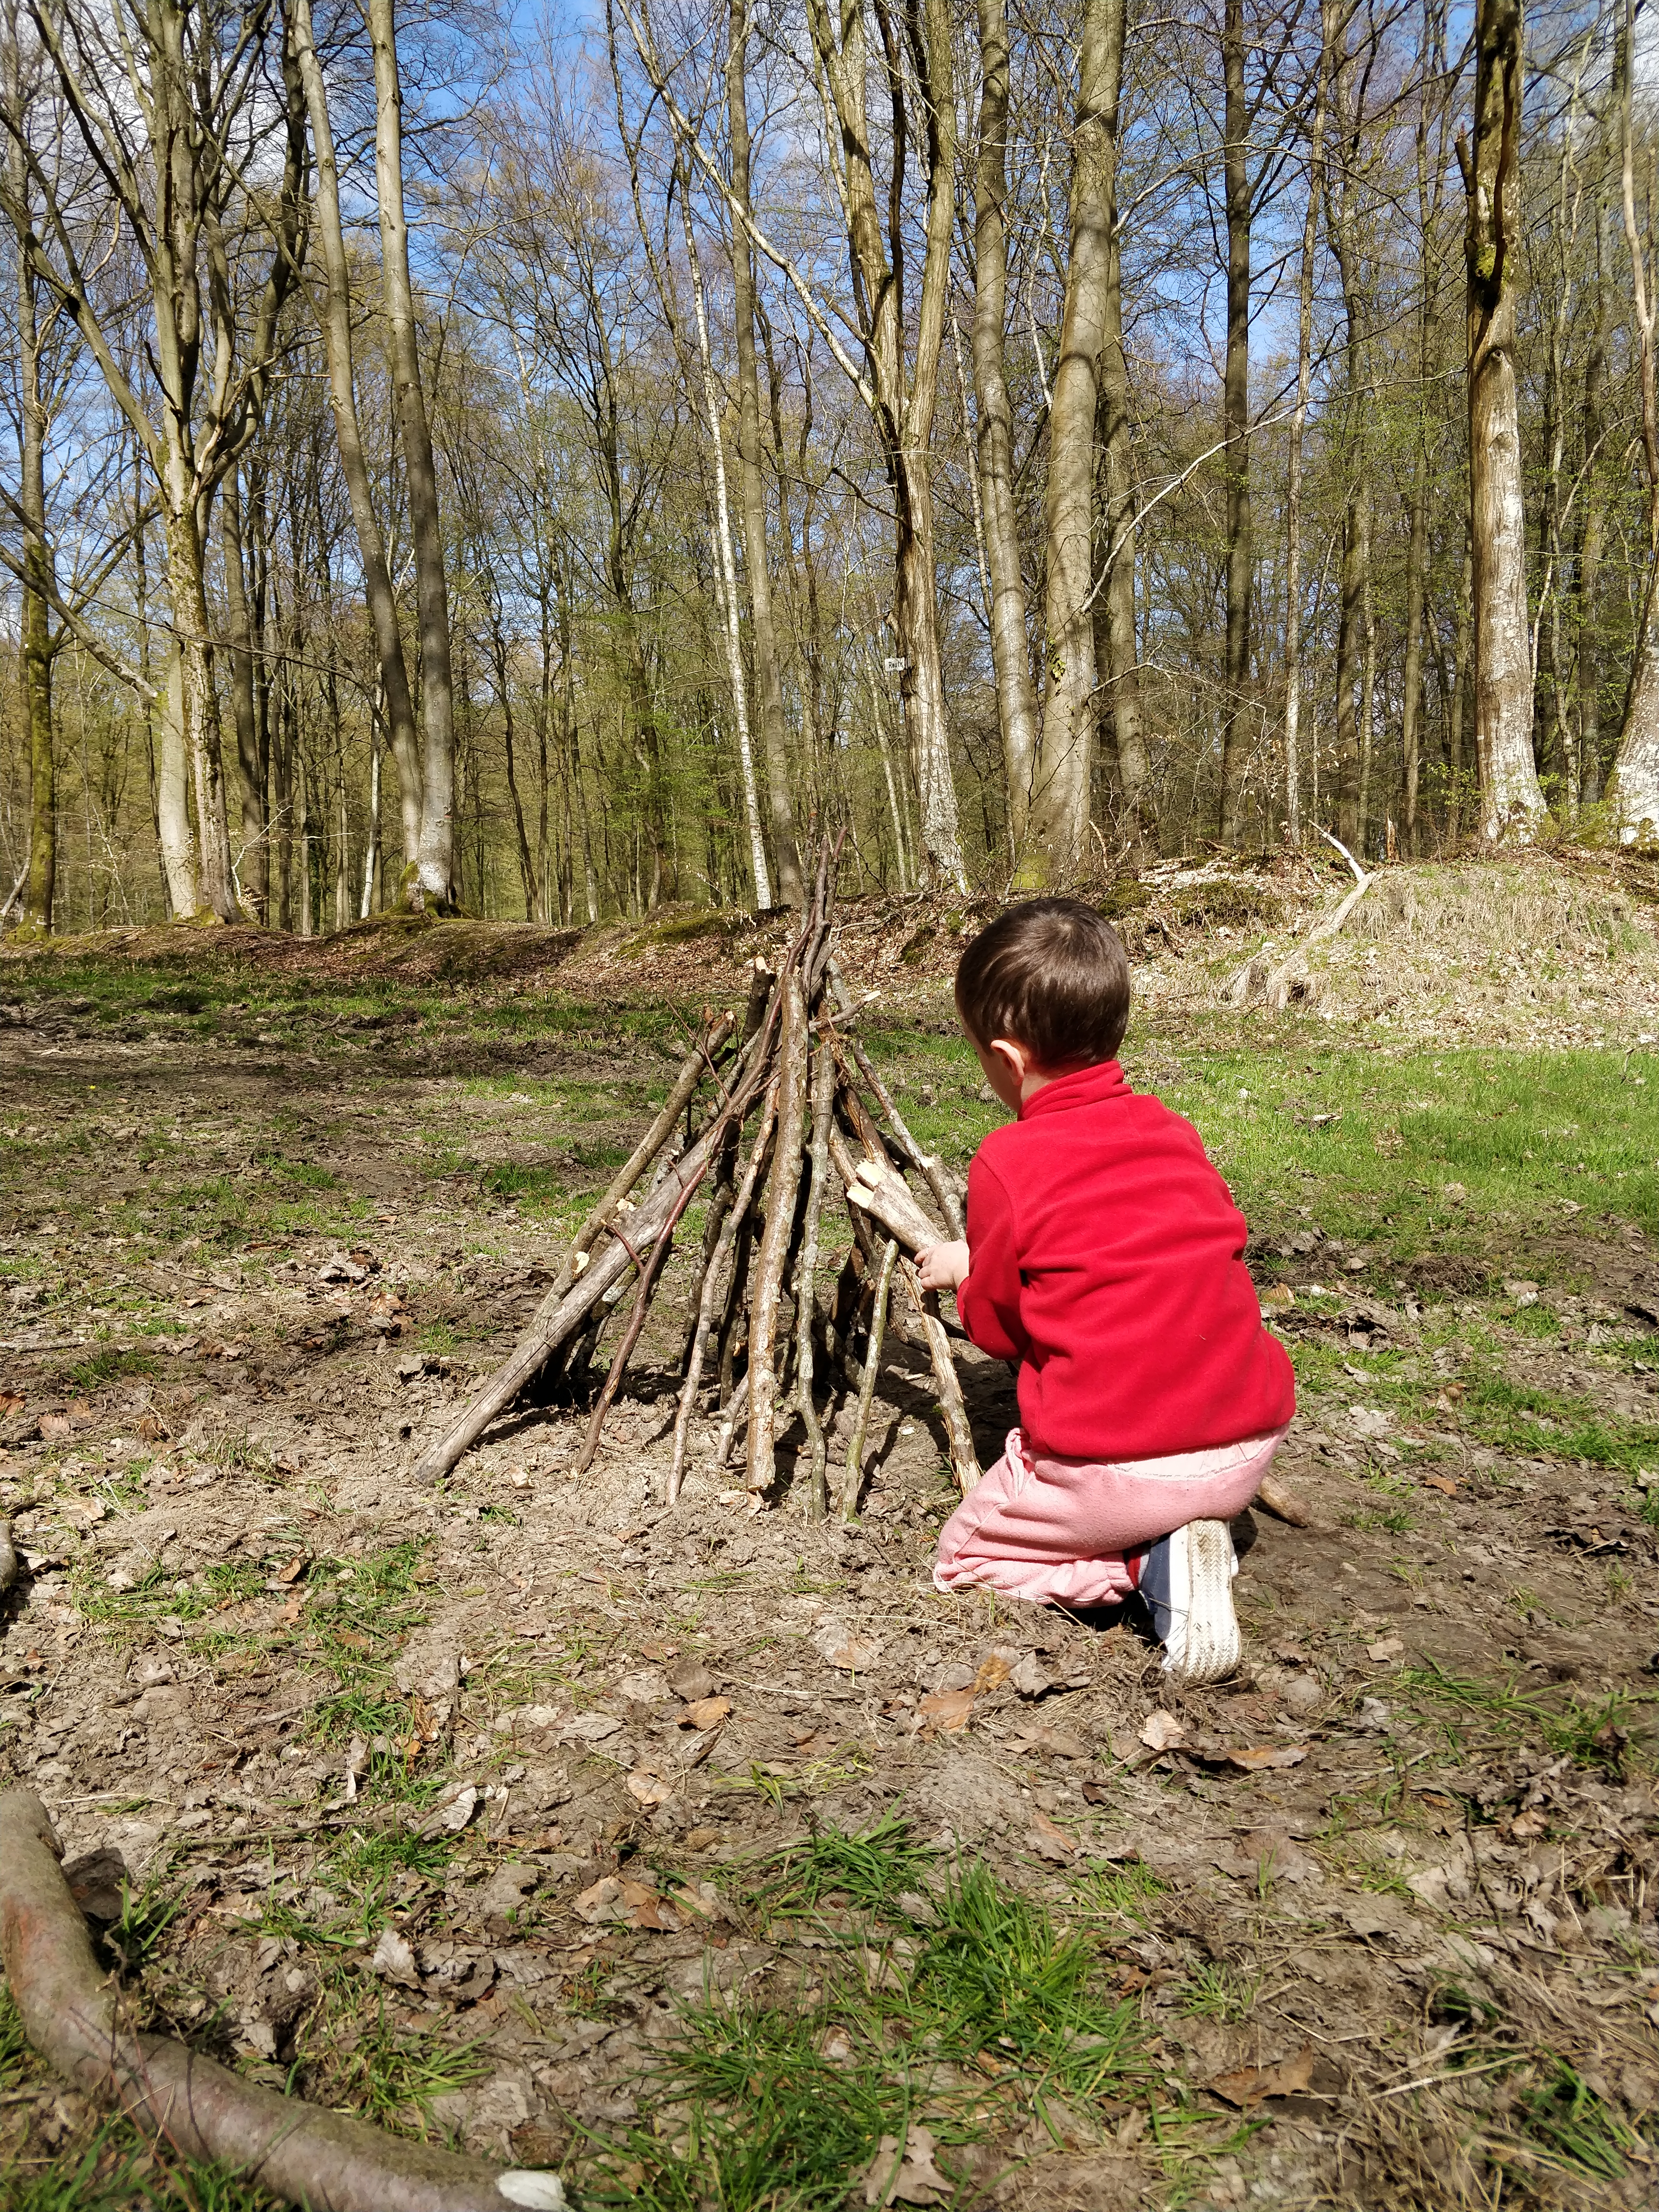 7 Criteria to Keep in Mind When Choosing a Kid Friendly Campsite